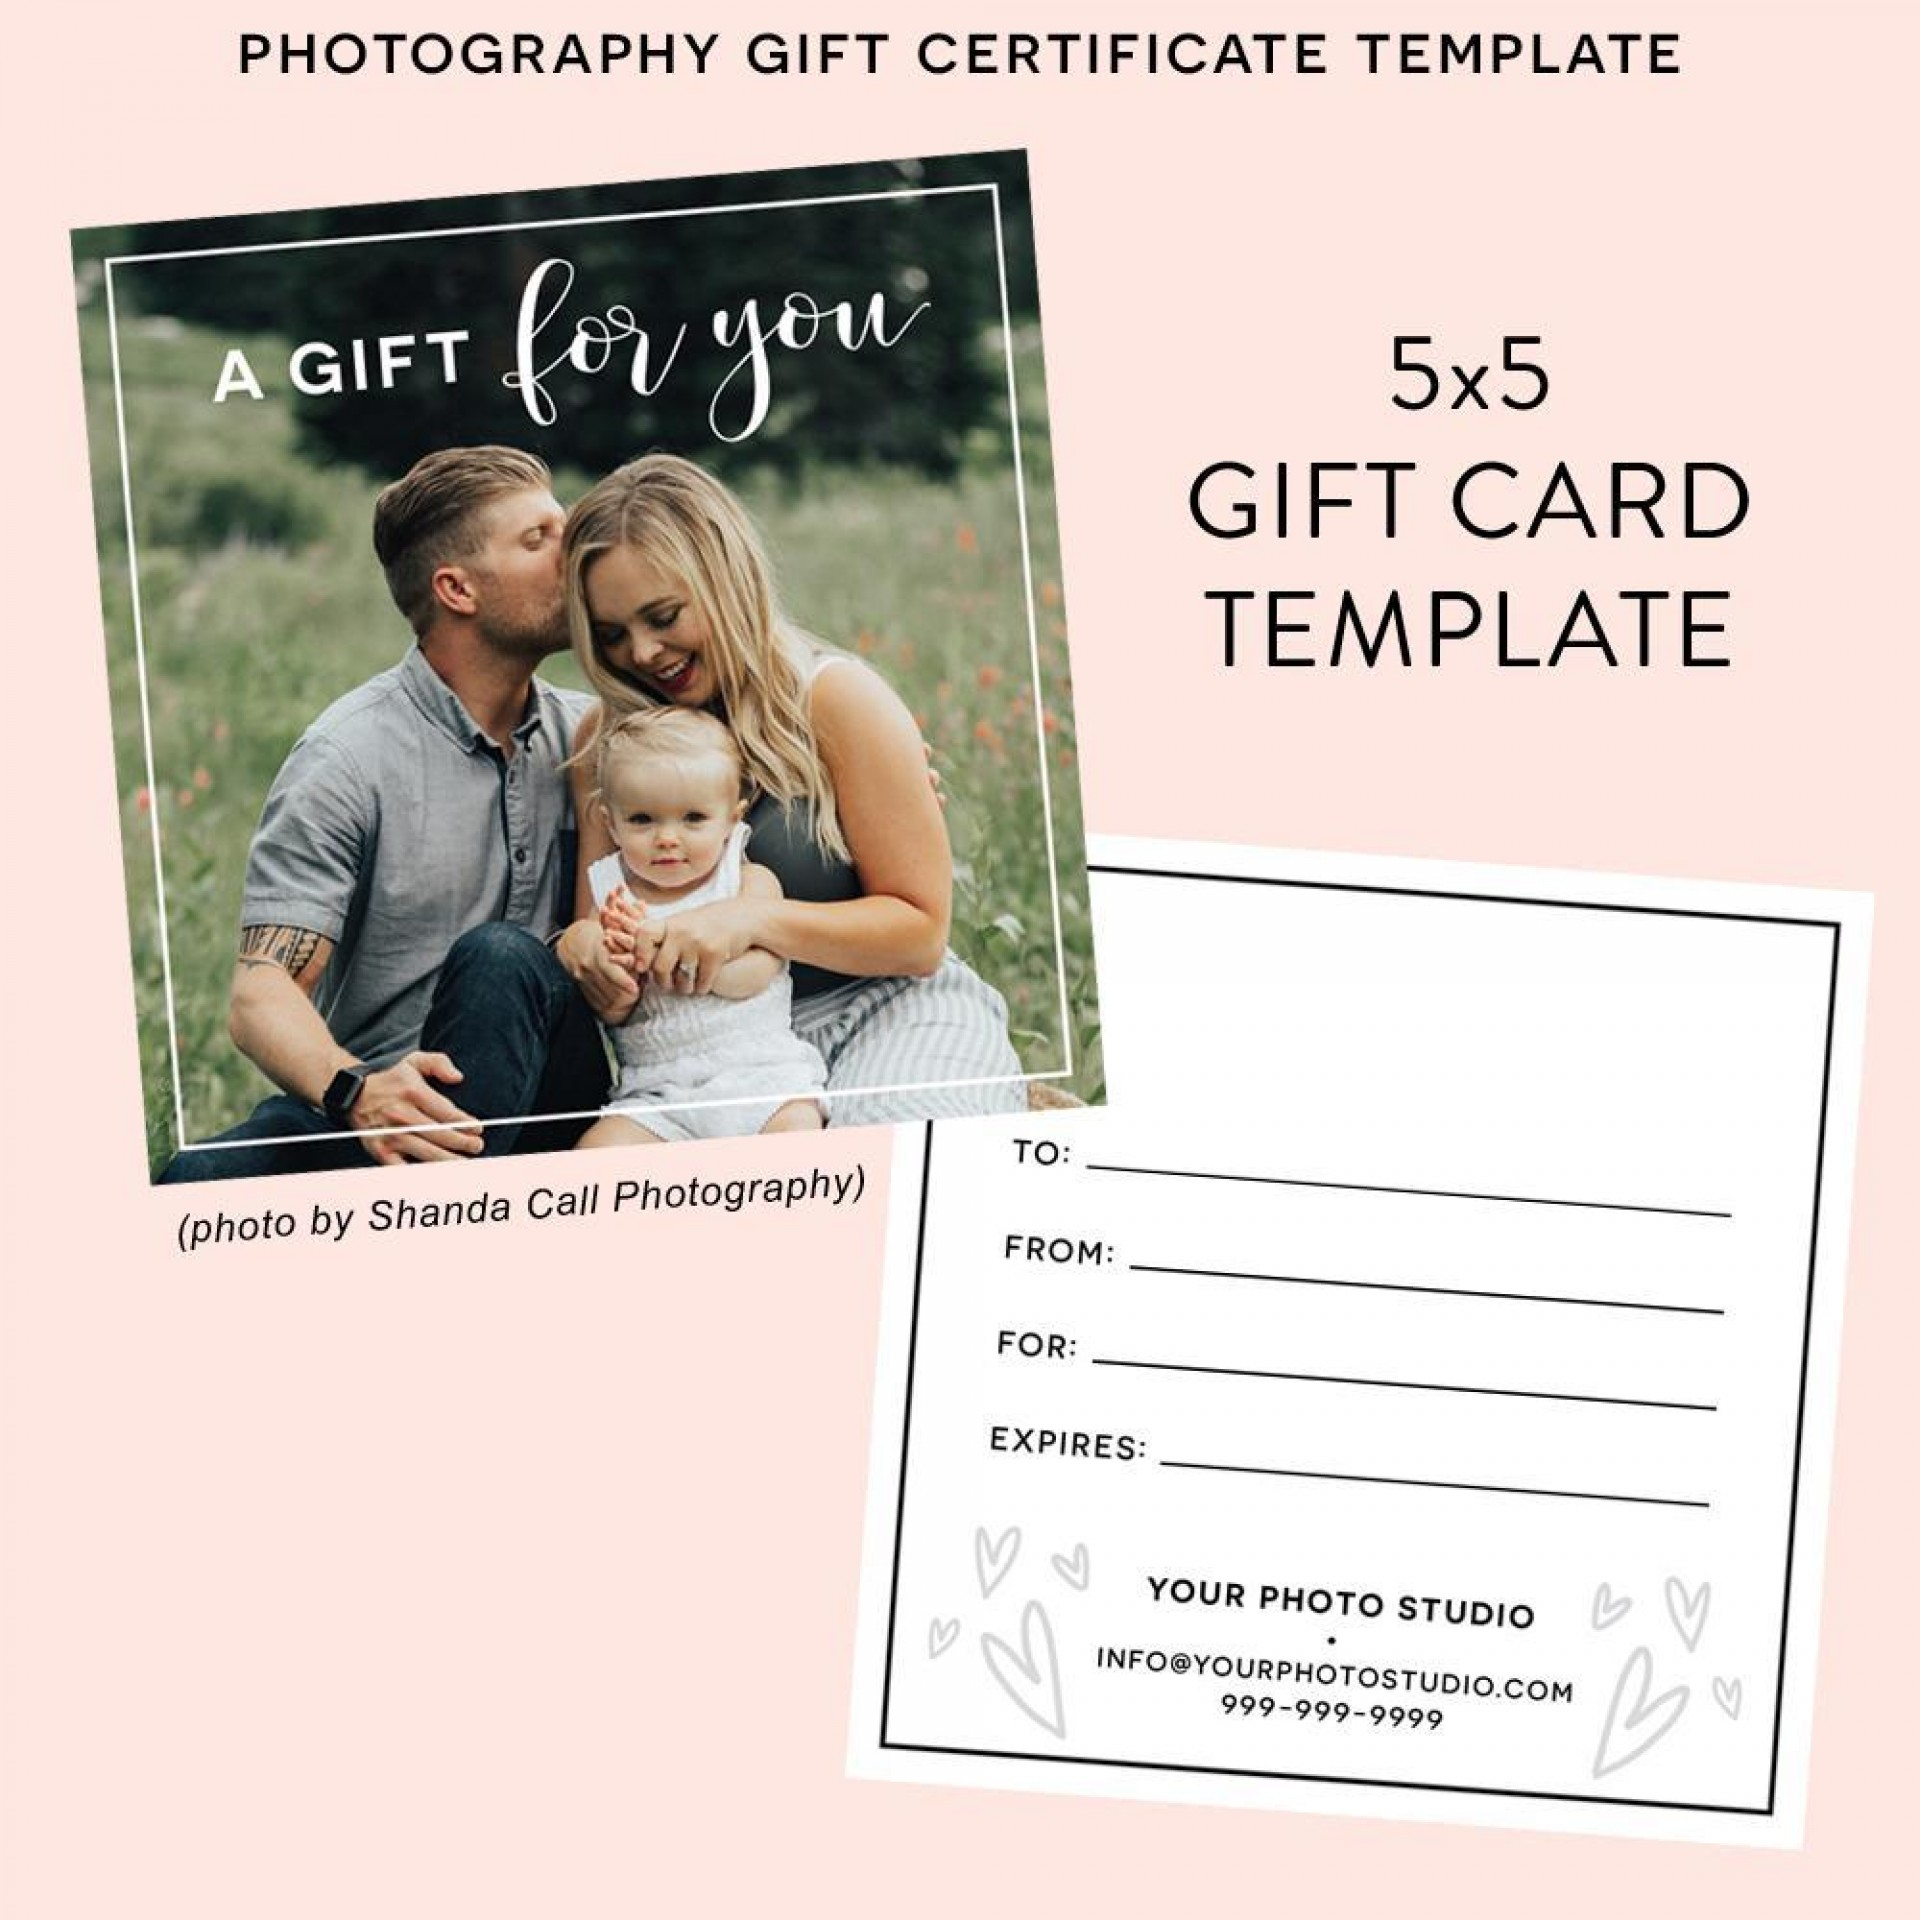 038 Photography Gift Certificate Template Photoshop Free Throughout Gift Certificate Template Photoshop